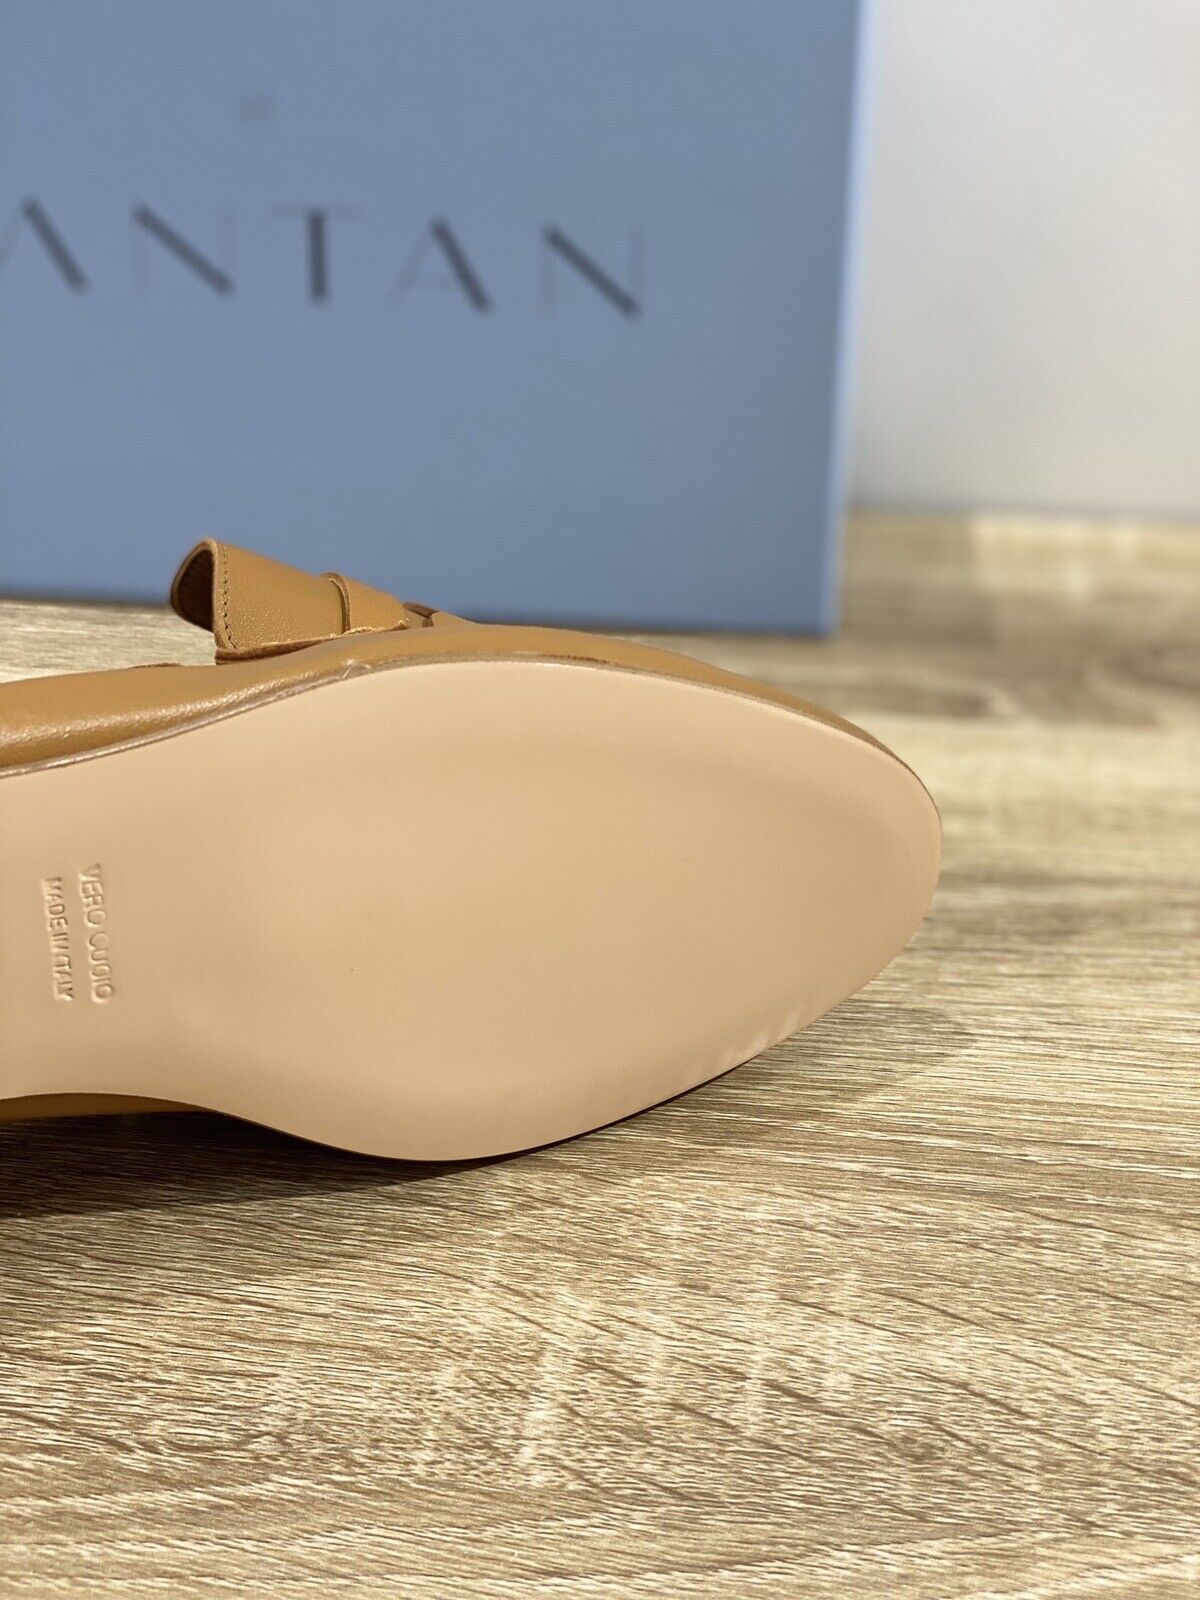 D’antan Mocassino Donna Pelle Cuoio Made In Italy 37